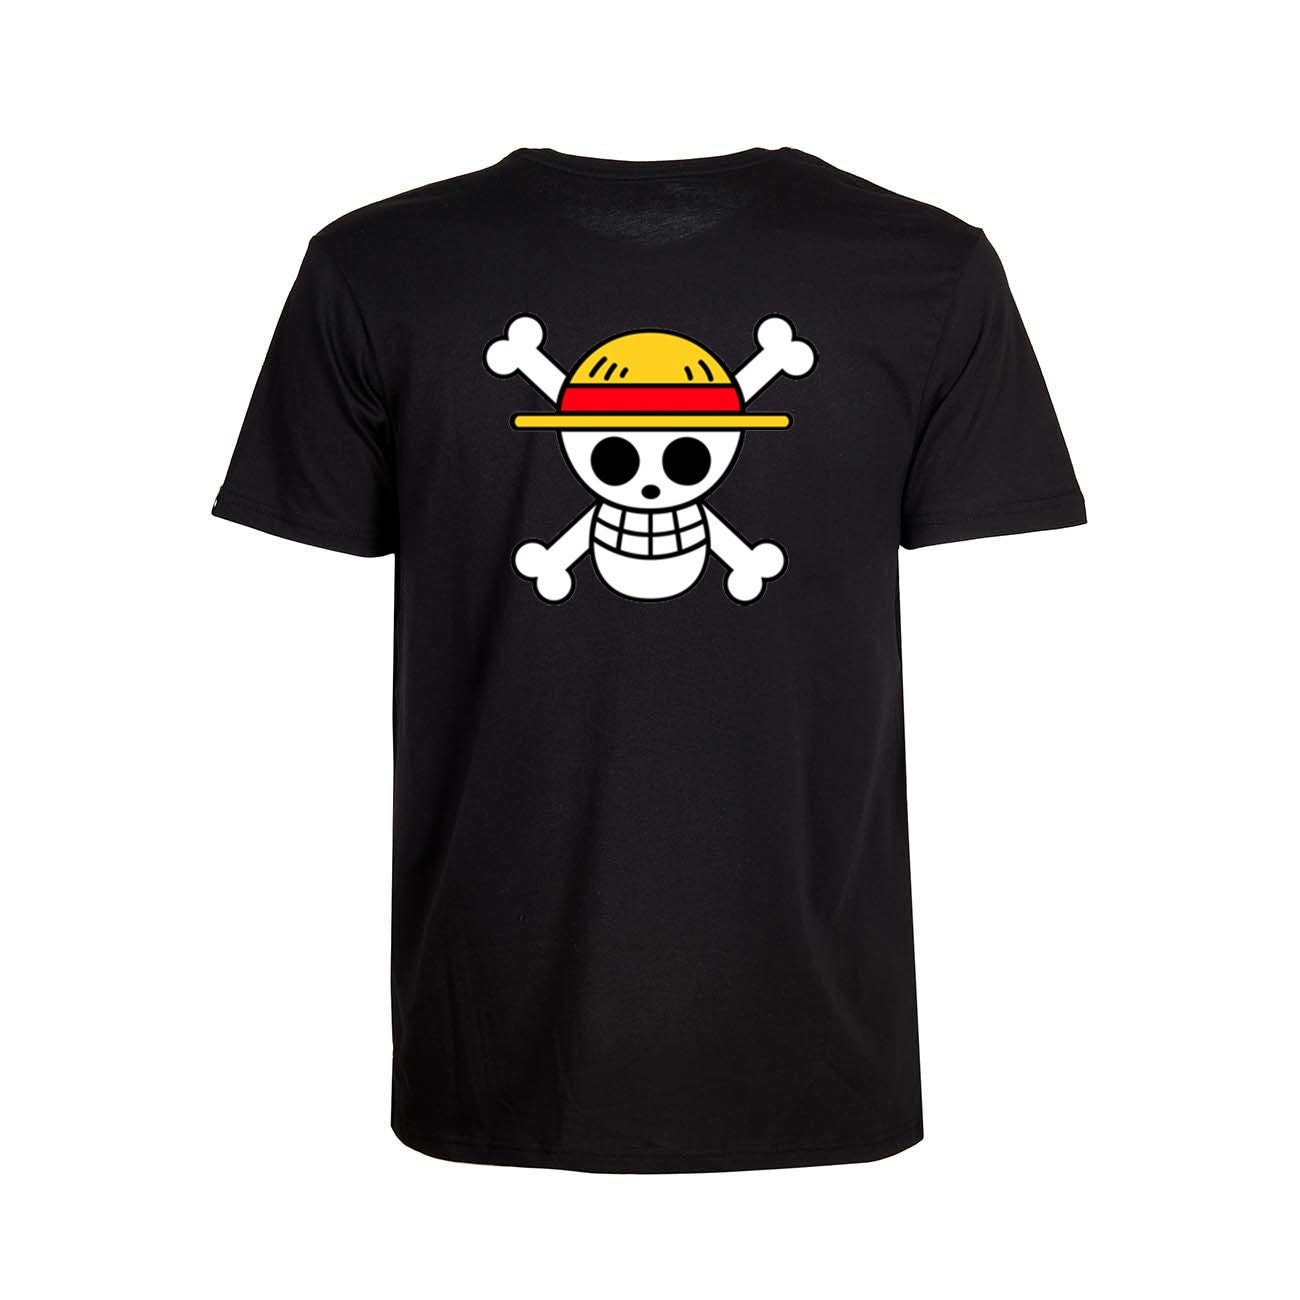 Strawhat Jolly Roger Shirt One Piece One Piece Strawhat - Etsy